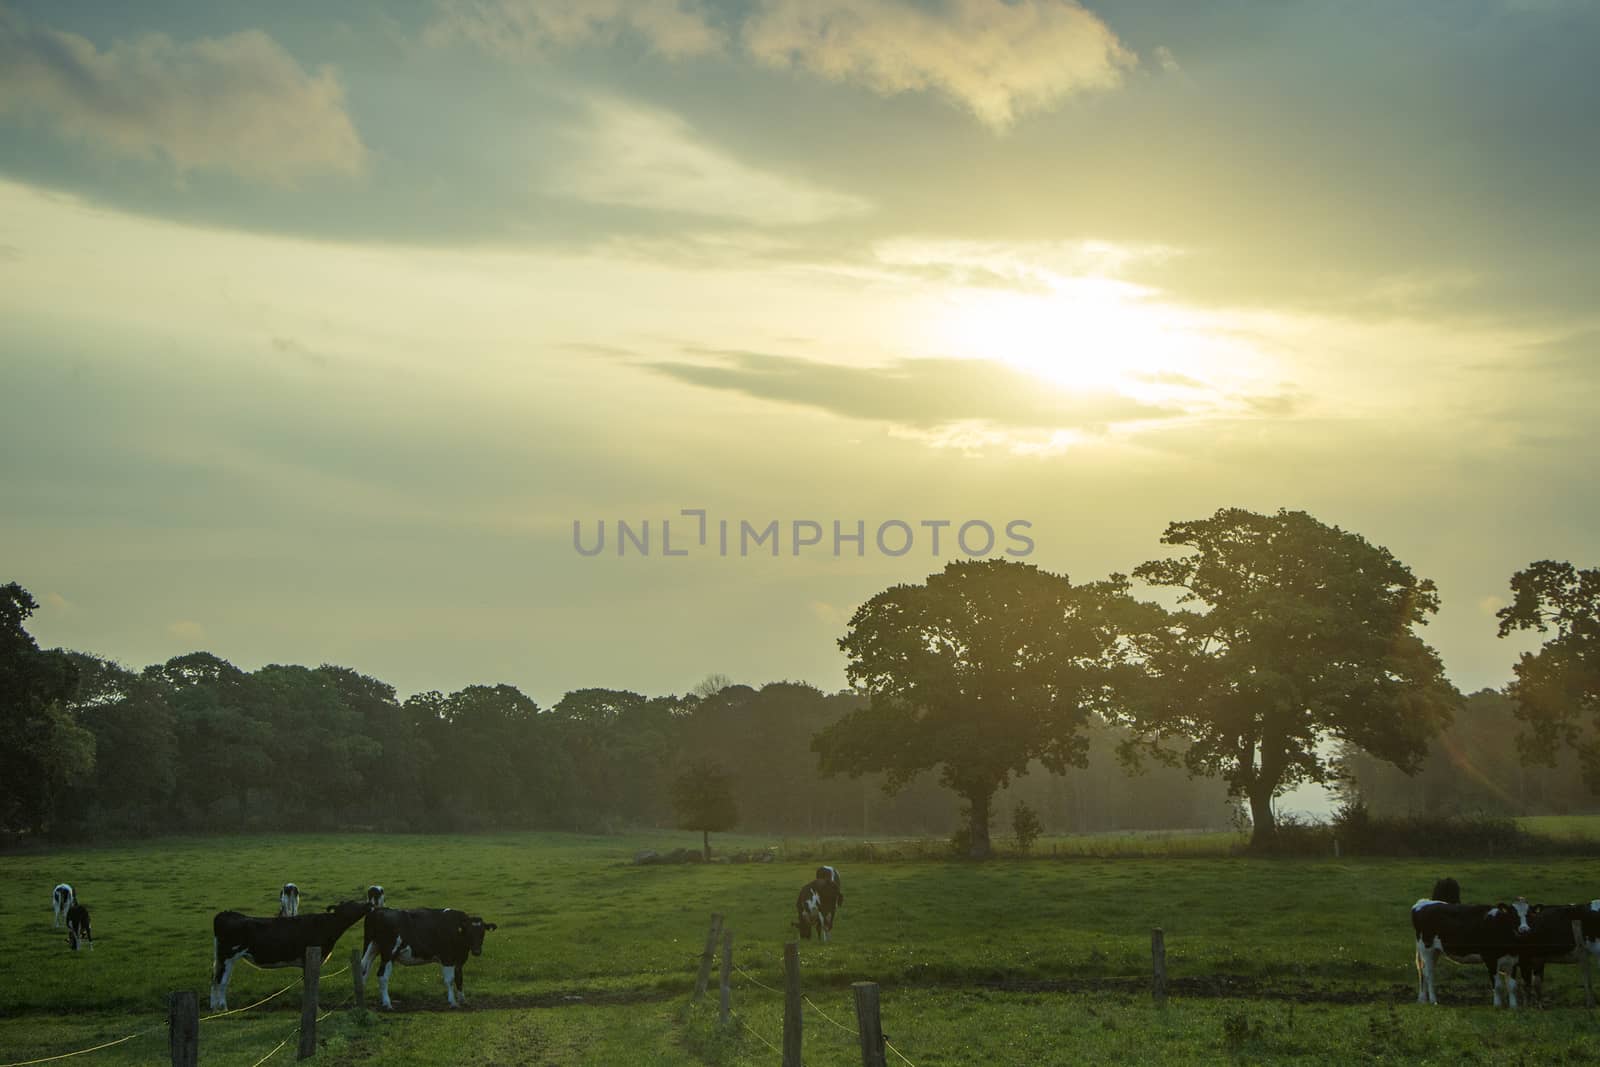 Sunrise and Cows by Mads_Hjorth_Jakobsen